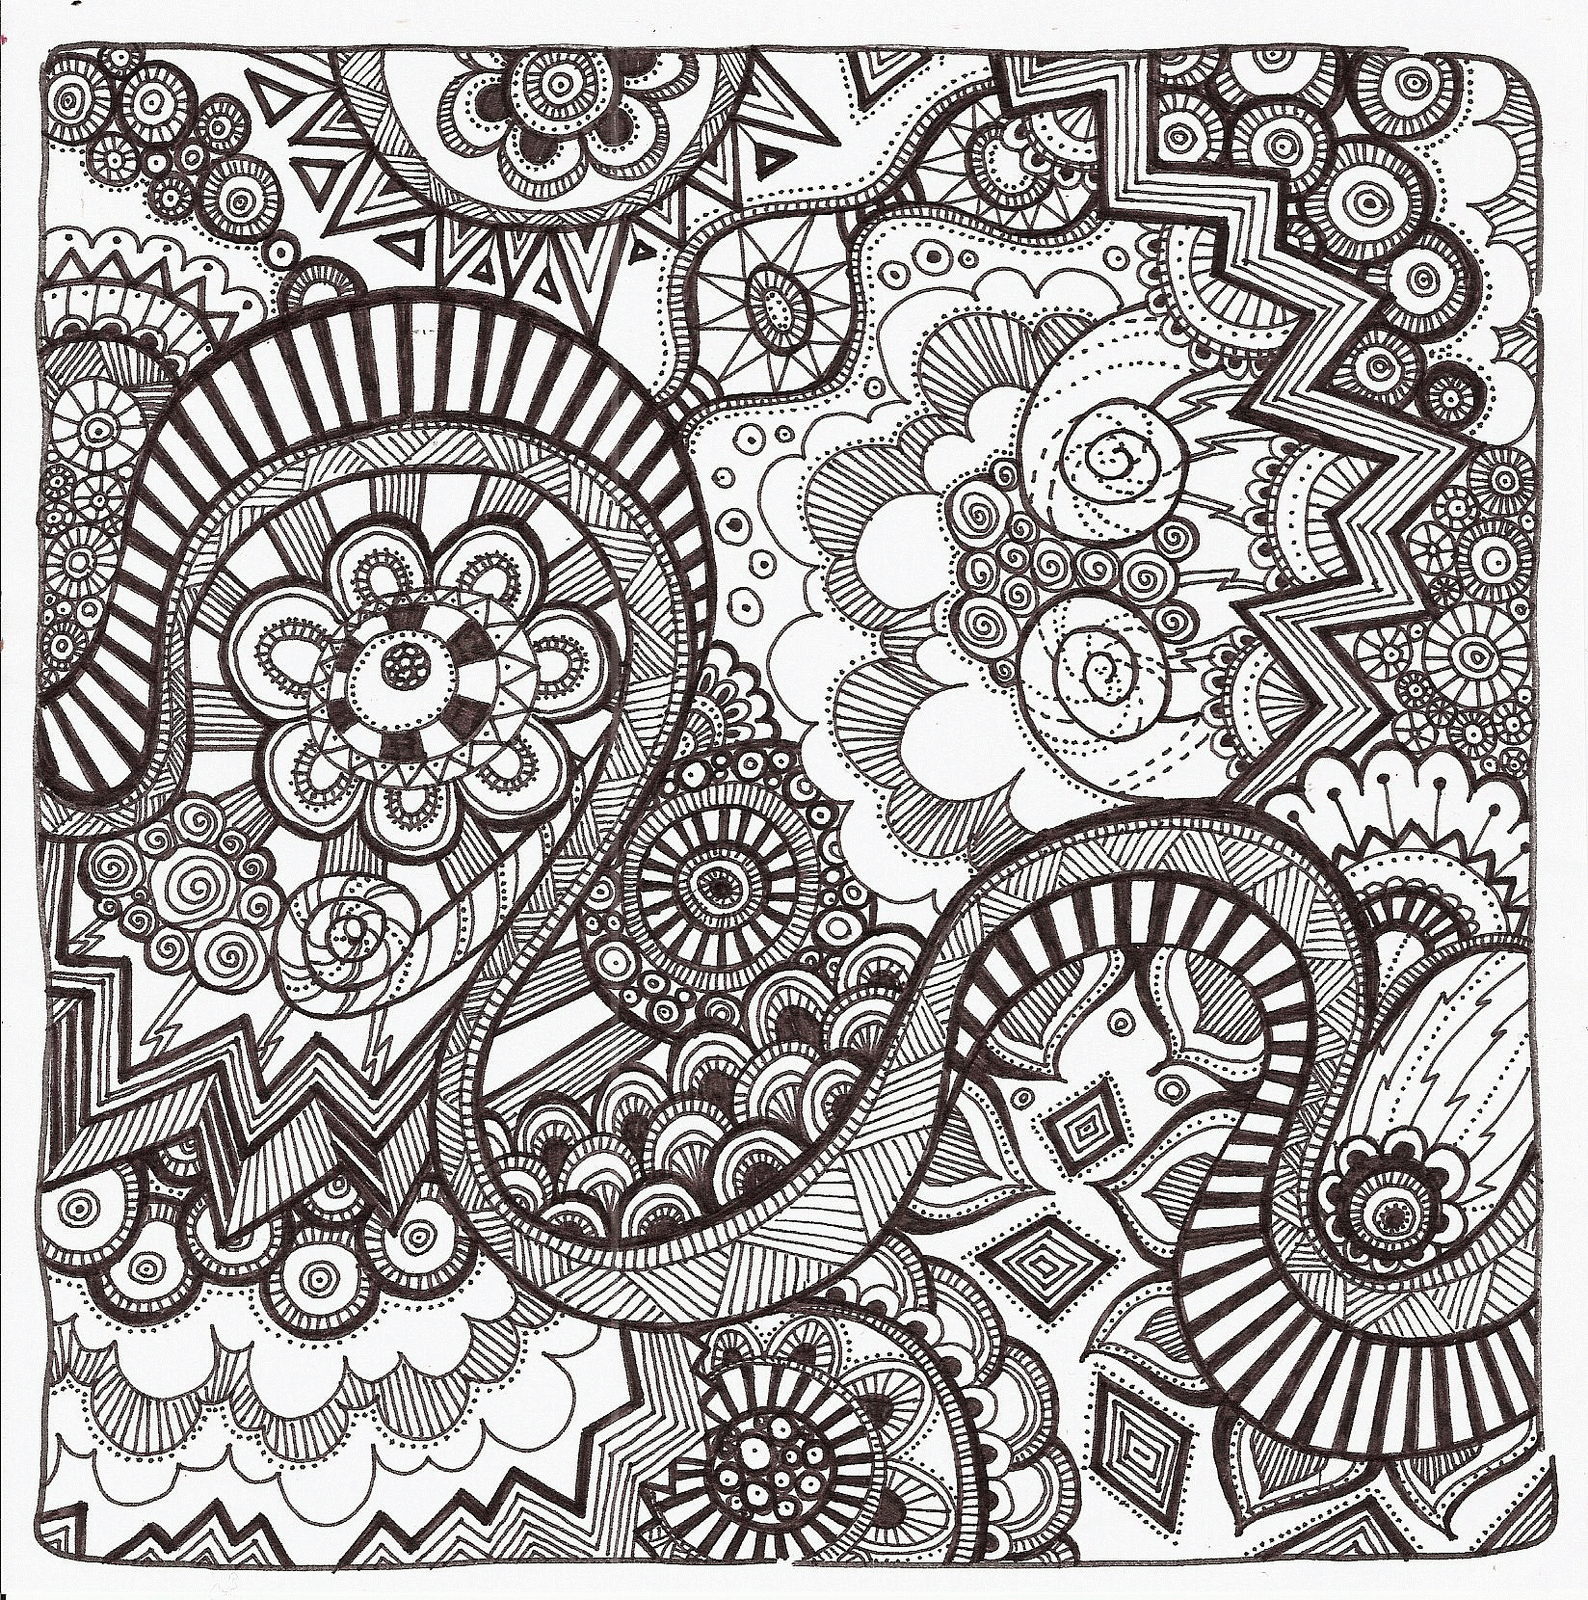 Free Zentangle Coloring Pages, Download Free Zentangle Coloring Pages